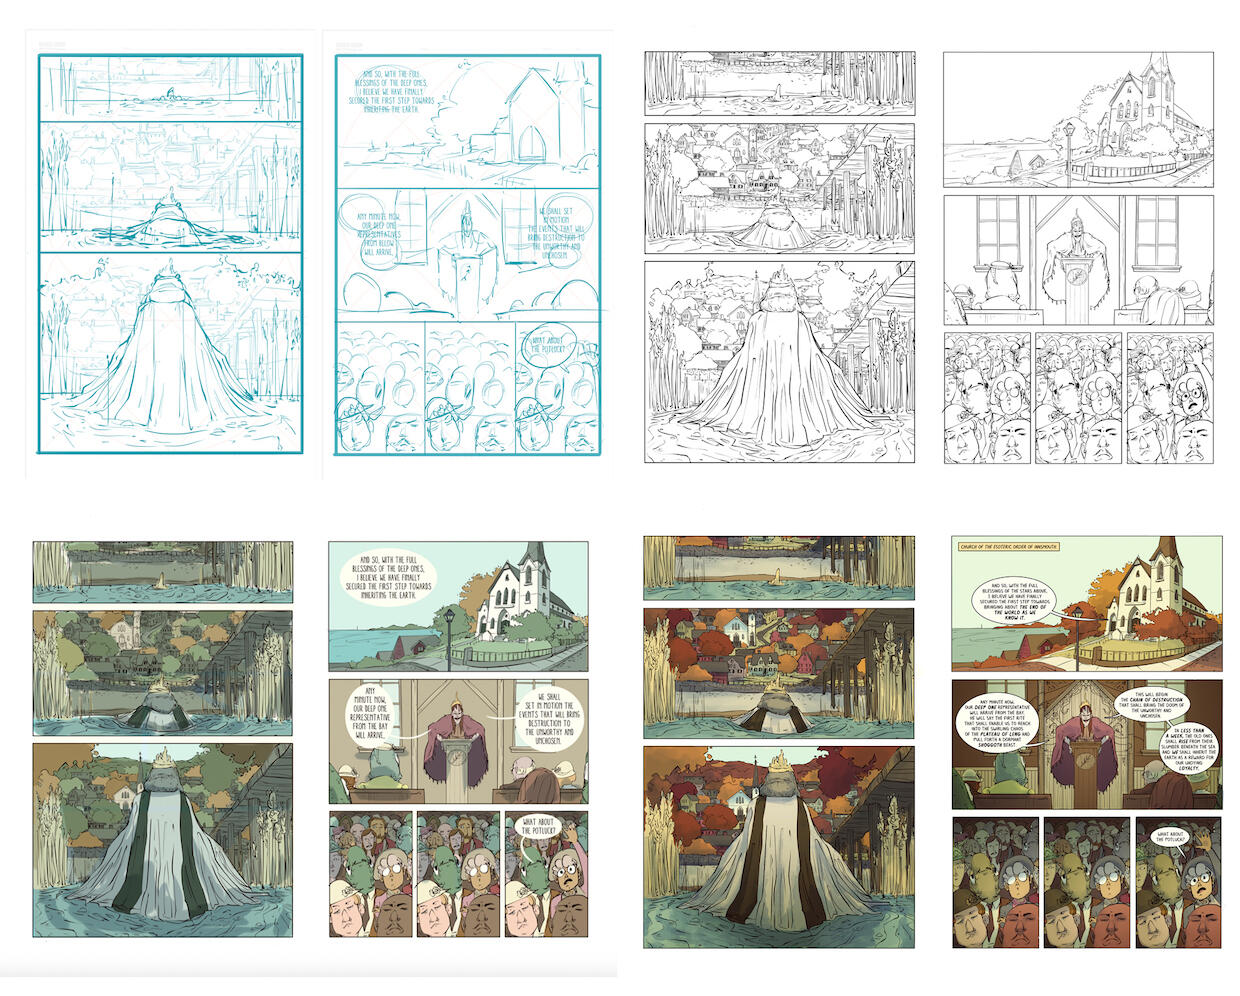 Samples of James' illustrations at various stages of development.